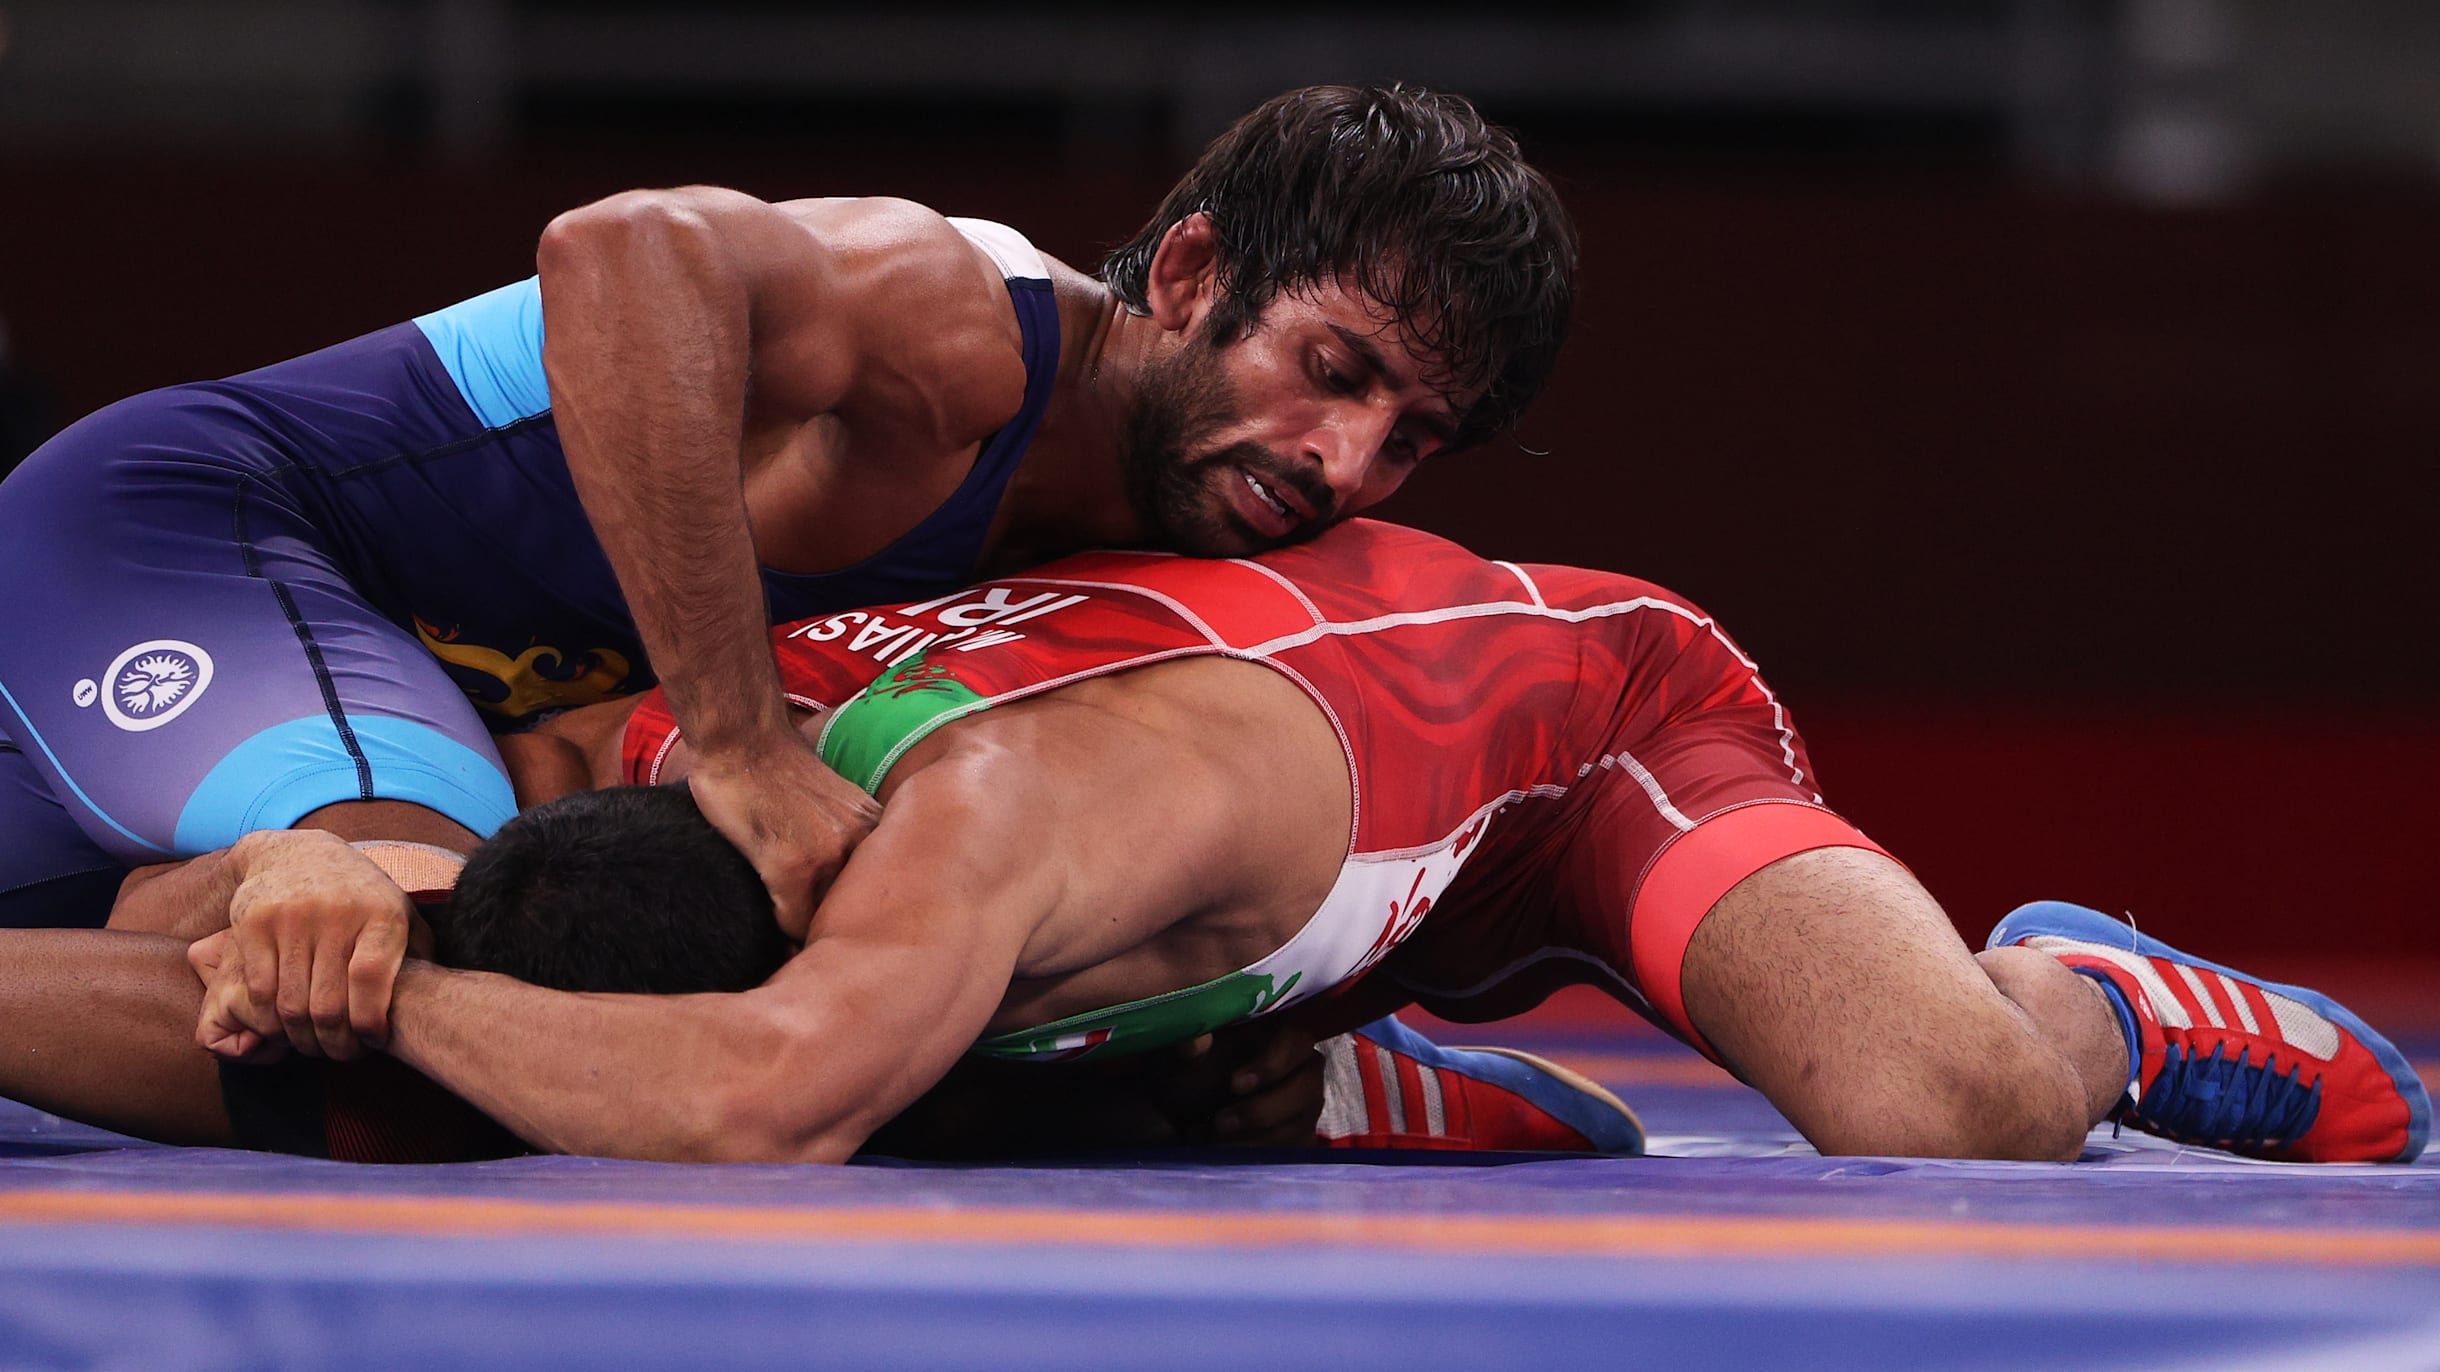 Bajrang Punia in Tokyo Olympics wrestling bronze medal match; watch live streaming and telecast in India